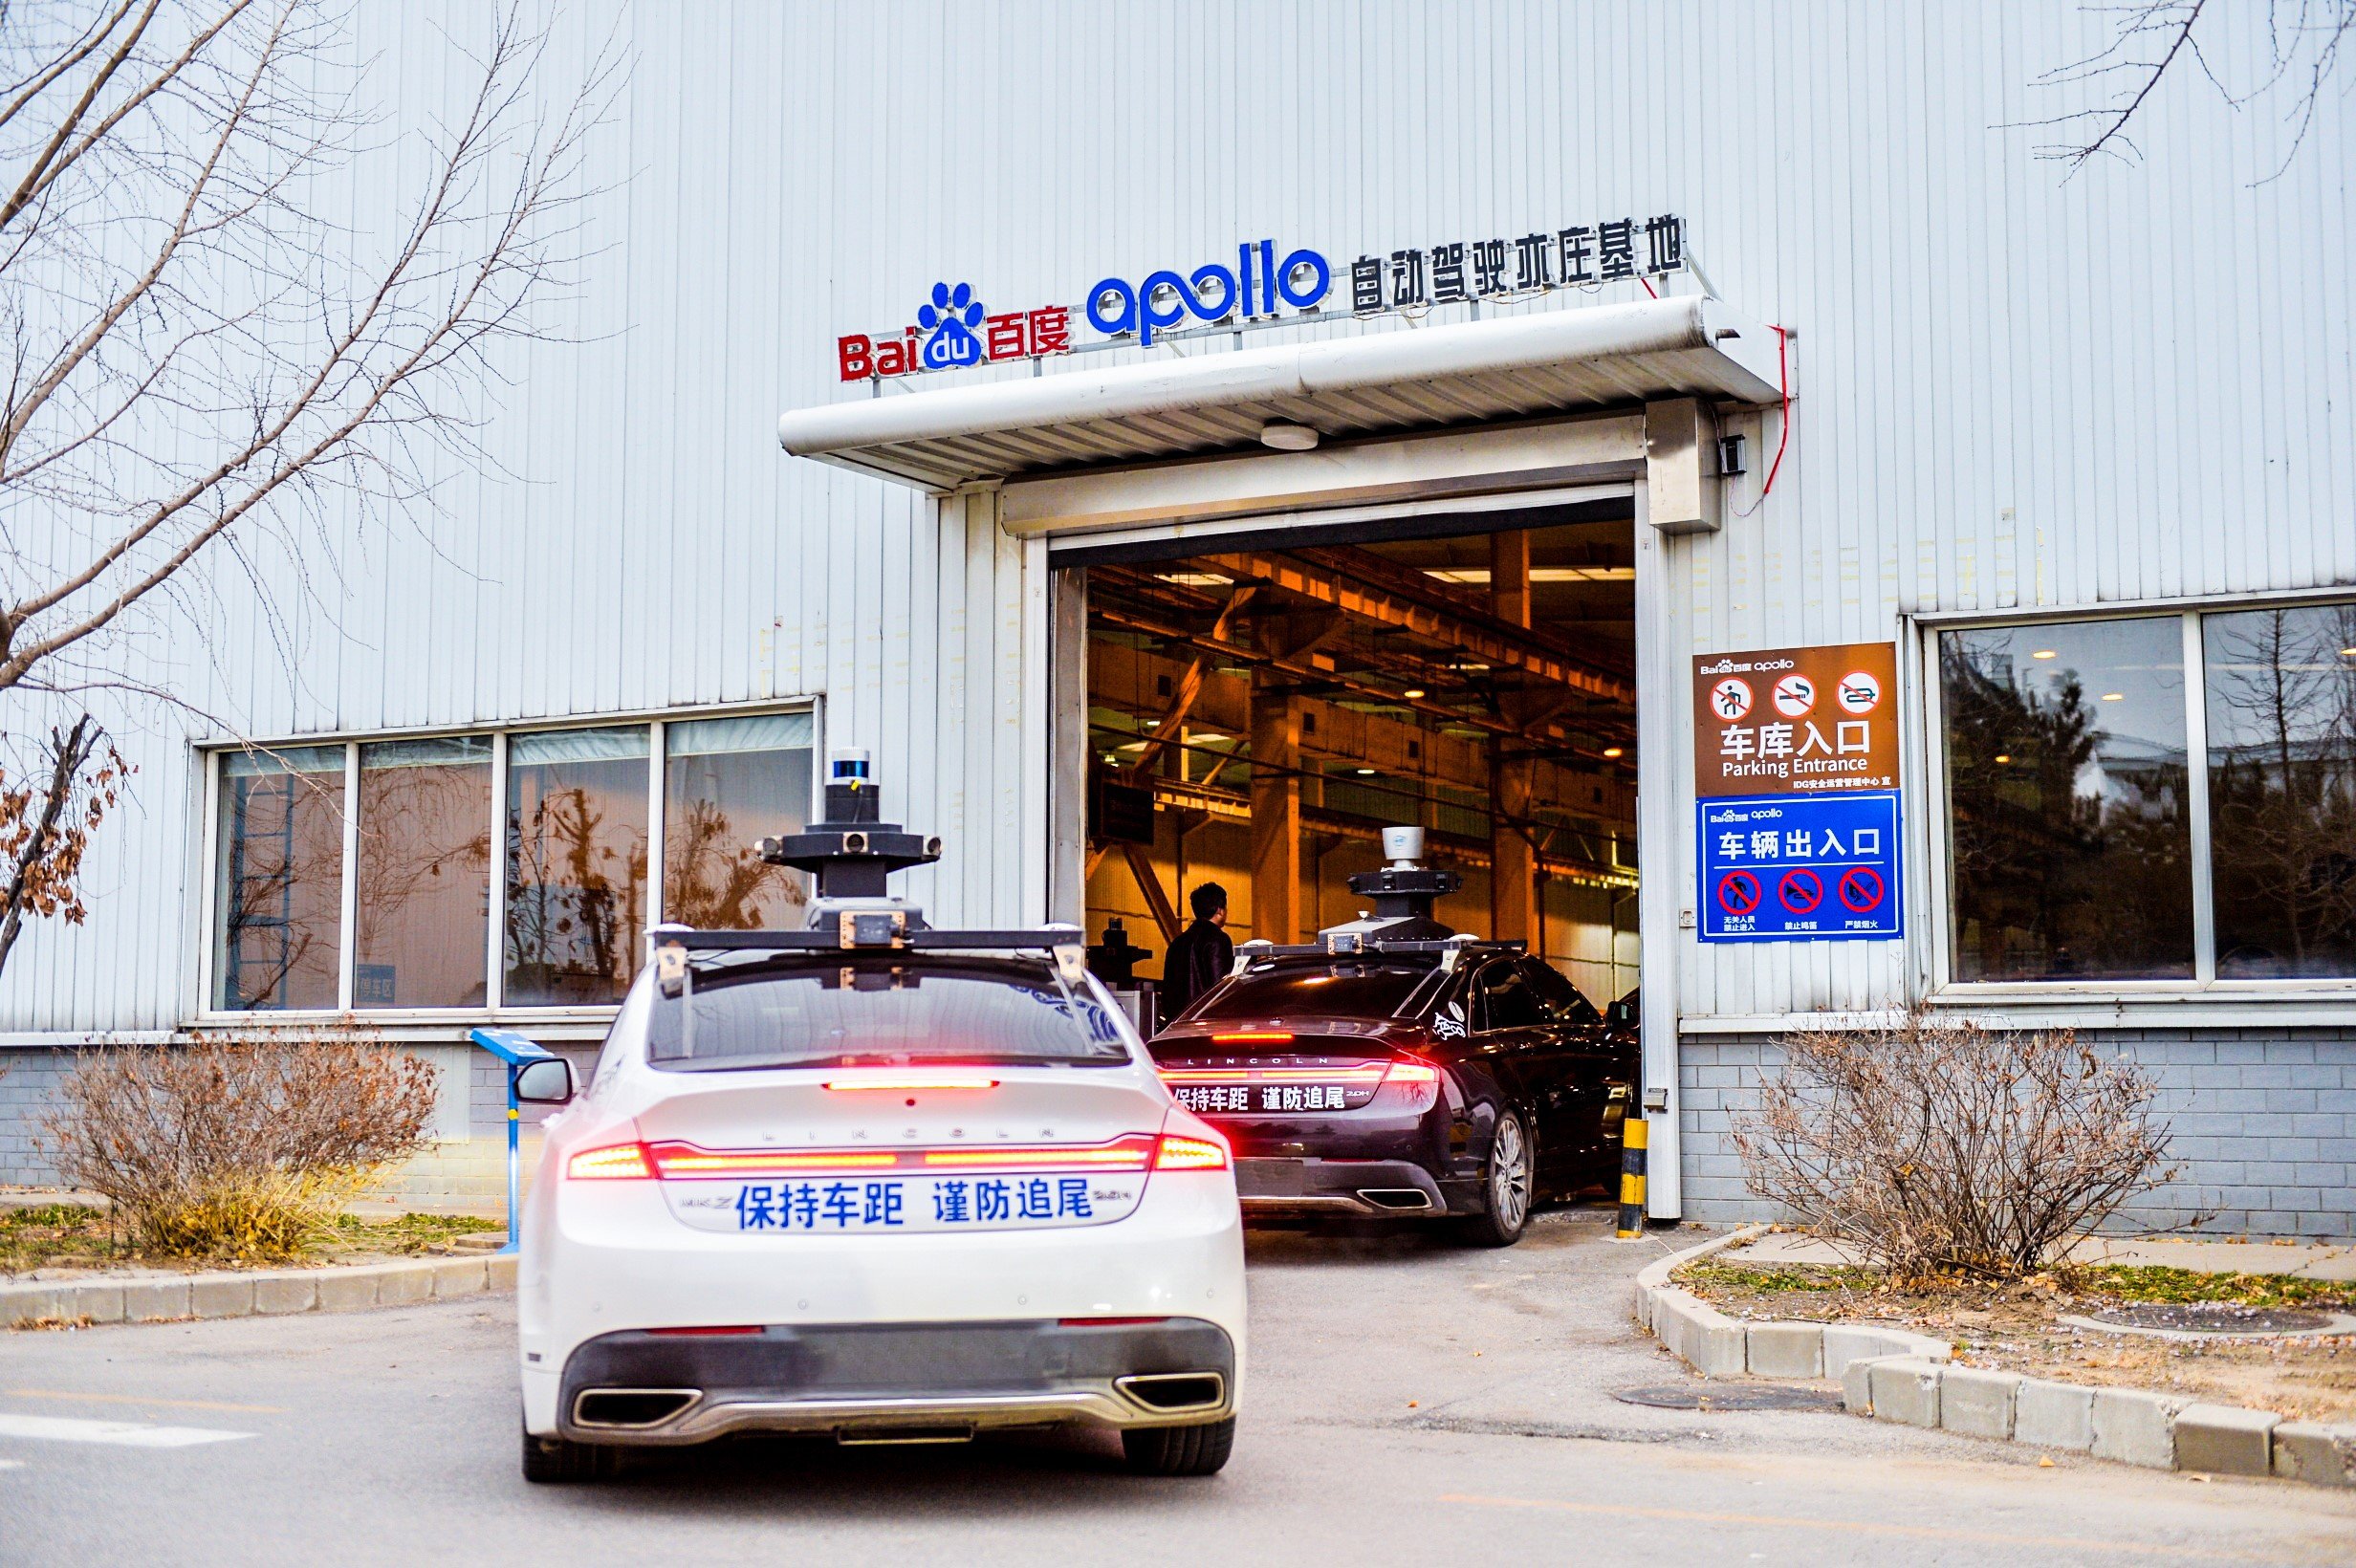 Baidu’s self-driving car project seeks to make money after investing in development for years. Photo: Handout